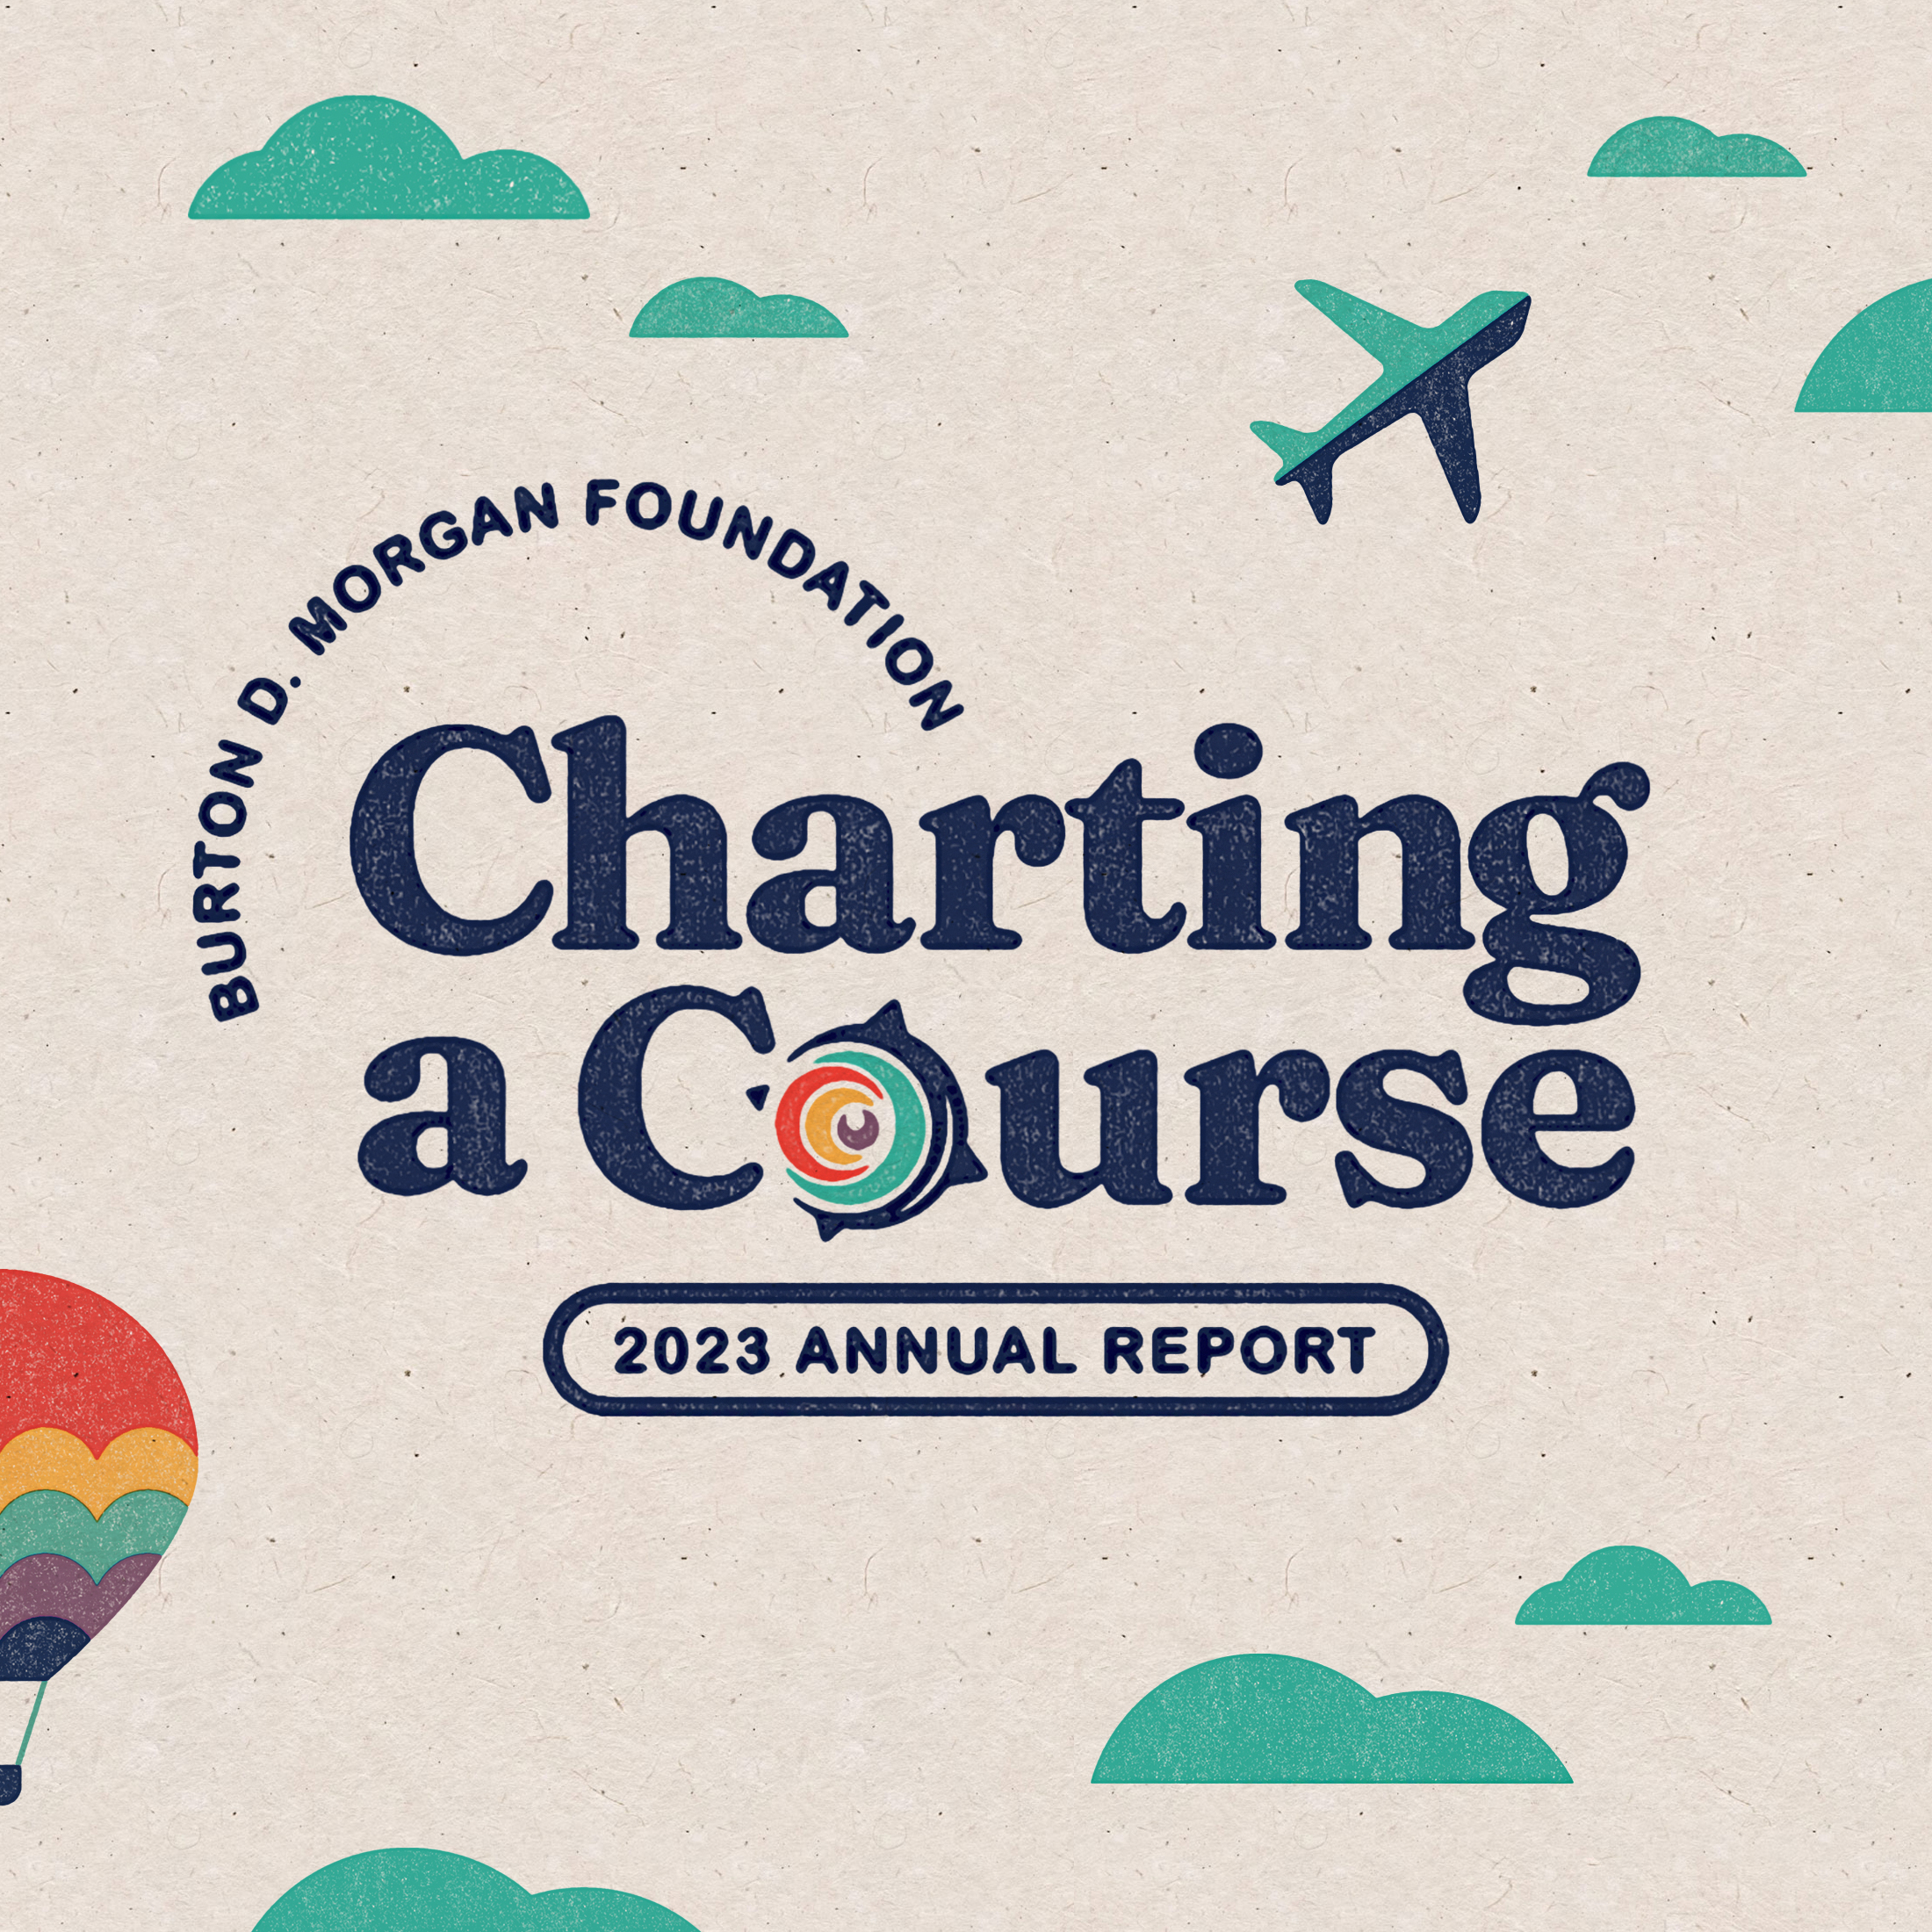 Charting a Course 2023 Annual Report